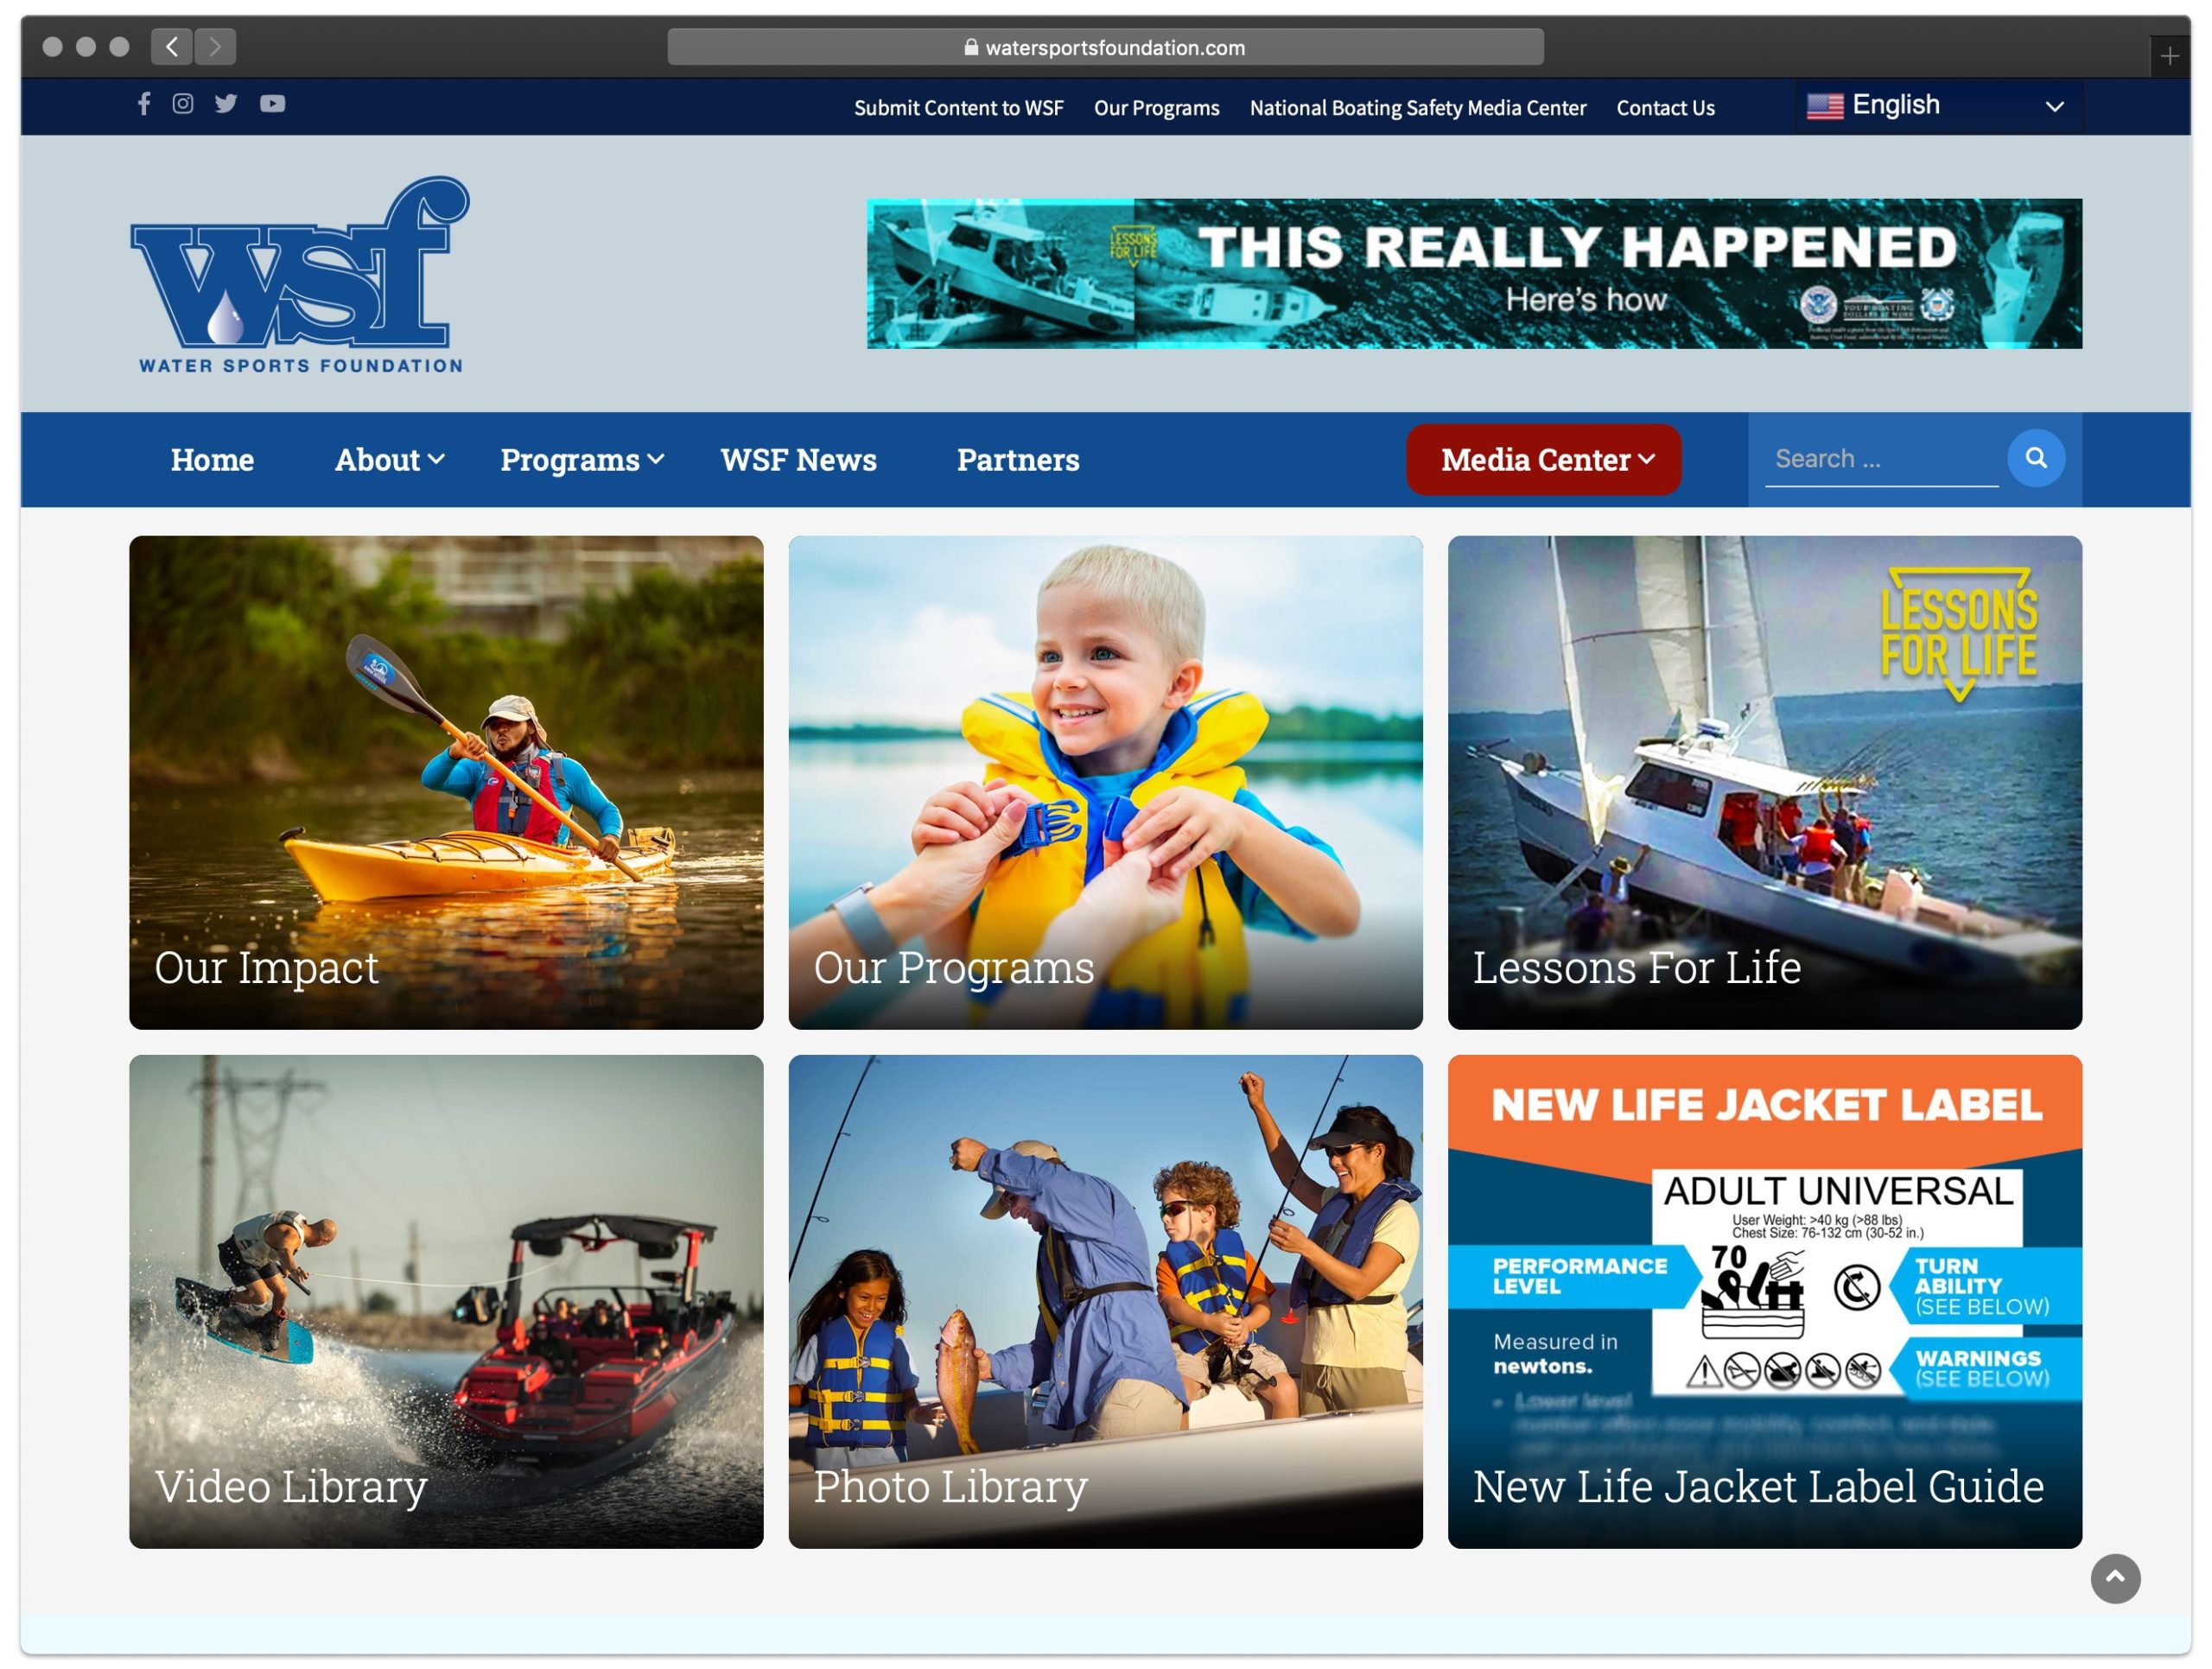 Water Sports Foundation launches “National Boating Safety Media Center”